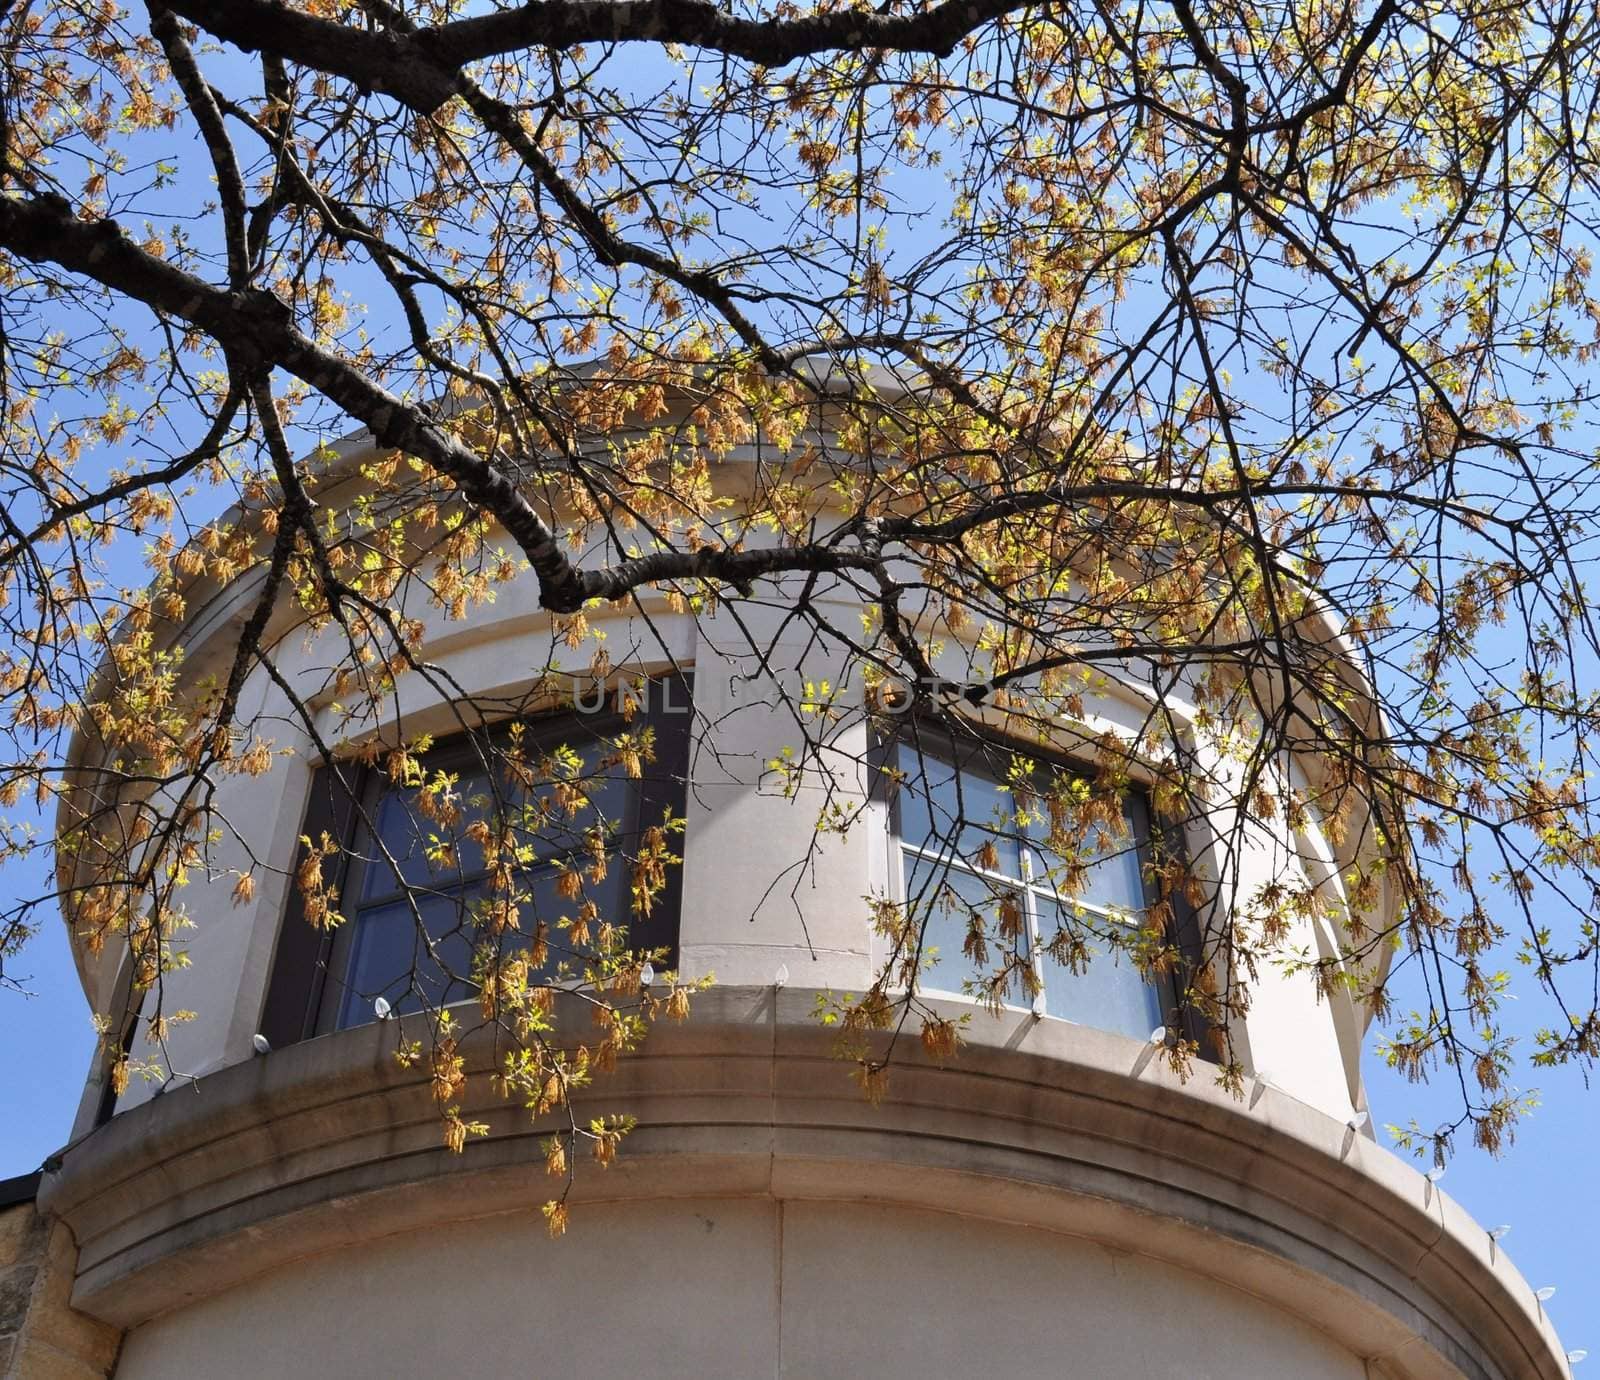 Georgetown Texas architecture and tree